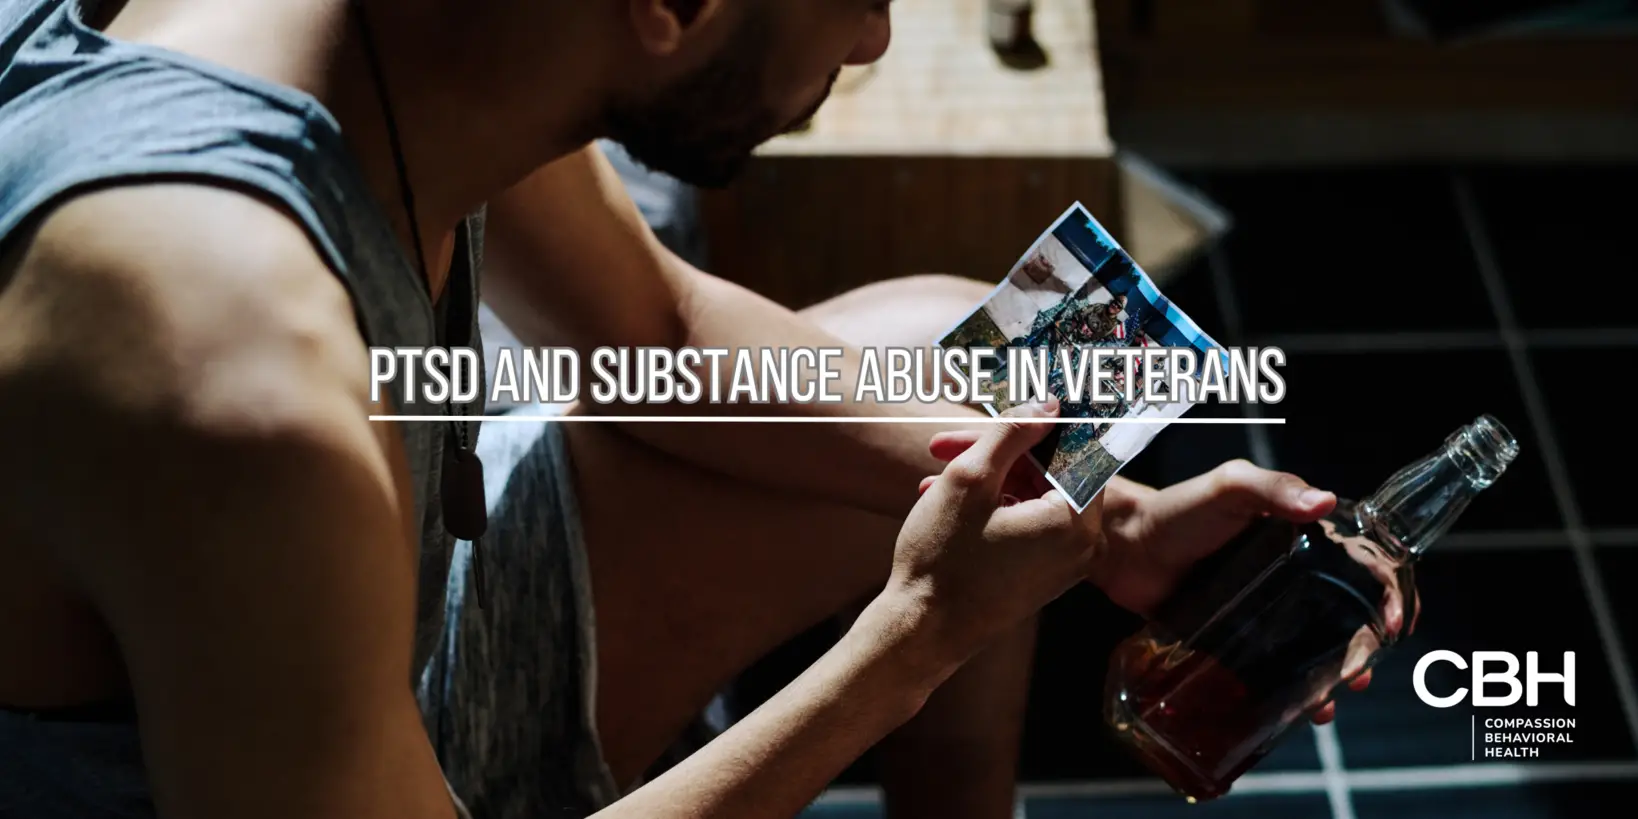 How-Can-PTSD-Lead-to-Substance-Abuse-in-Veterans-